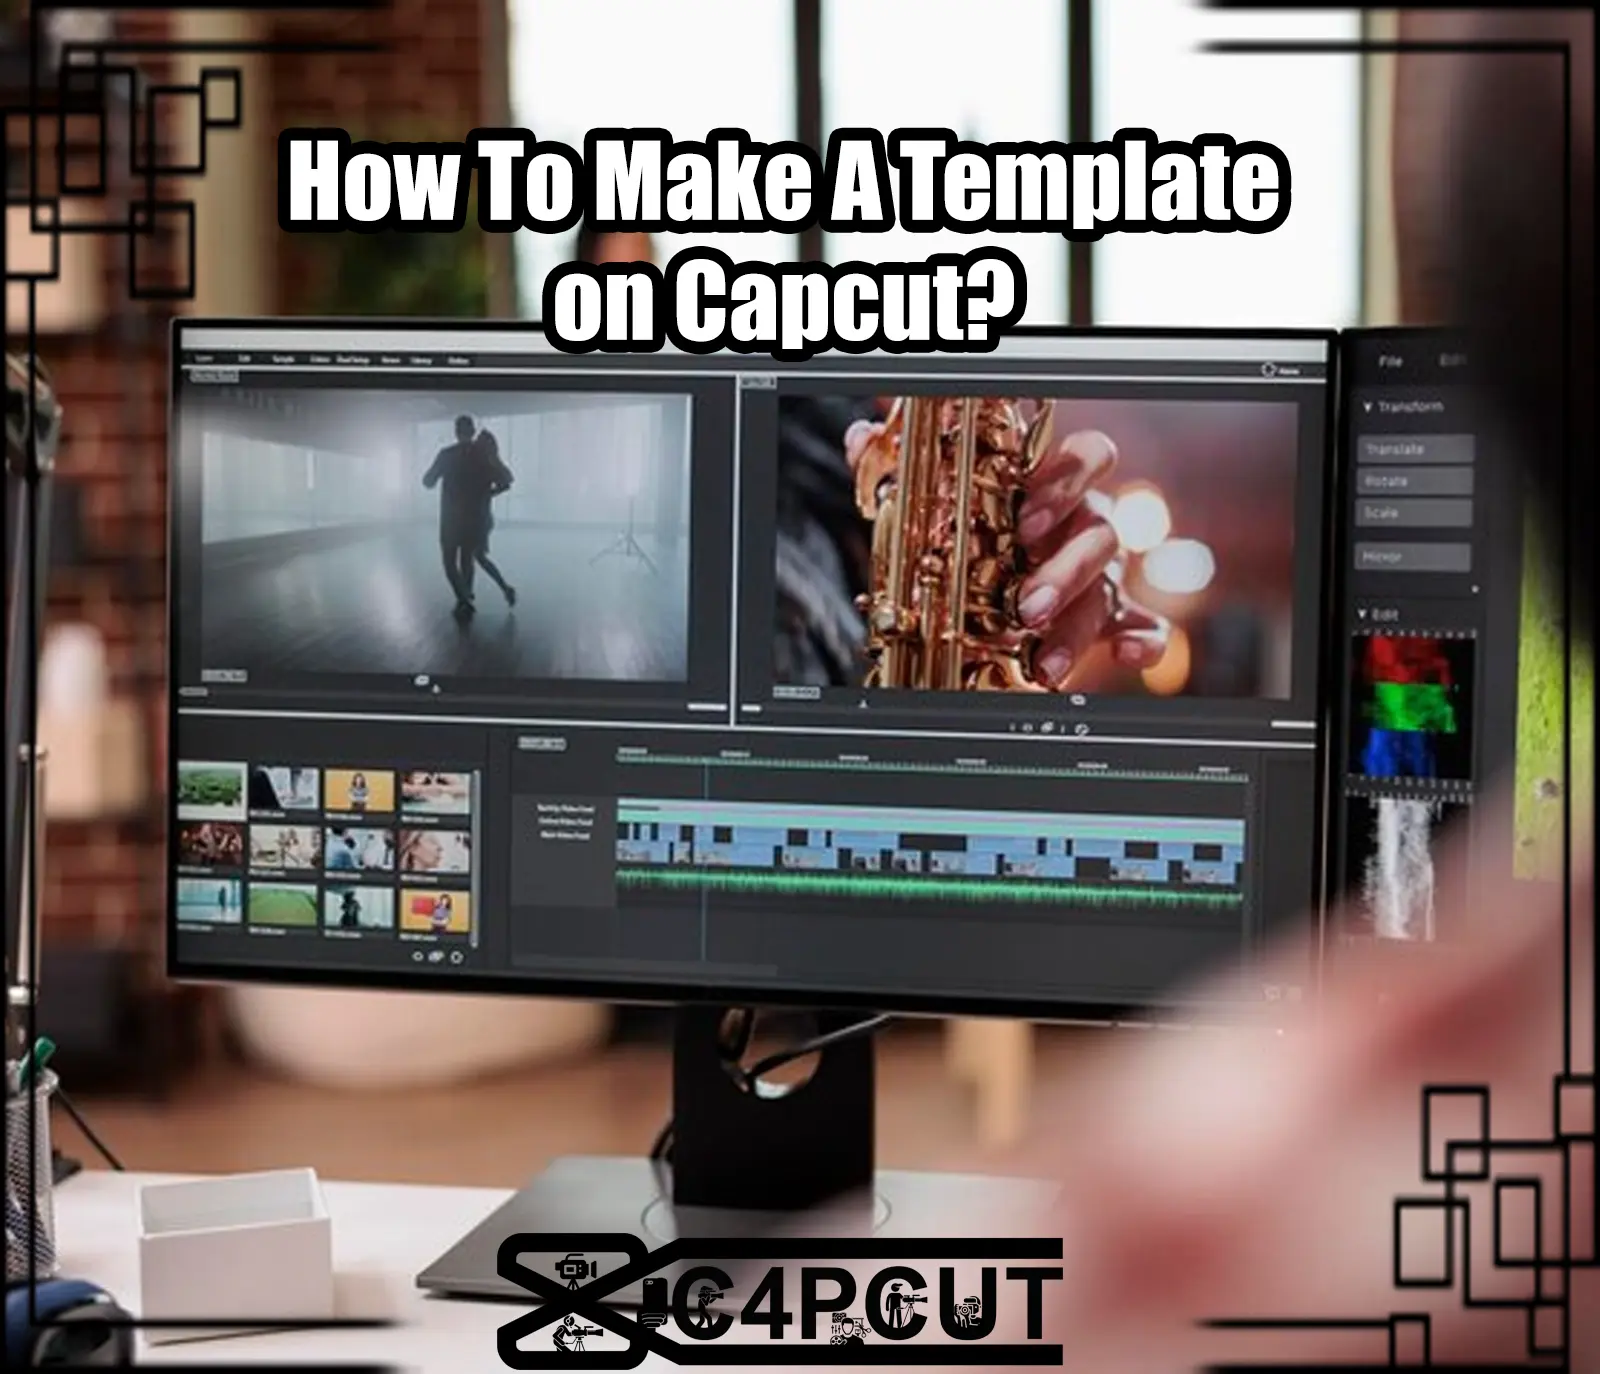 How To Make A Template on Capcut?